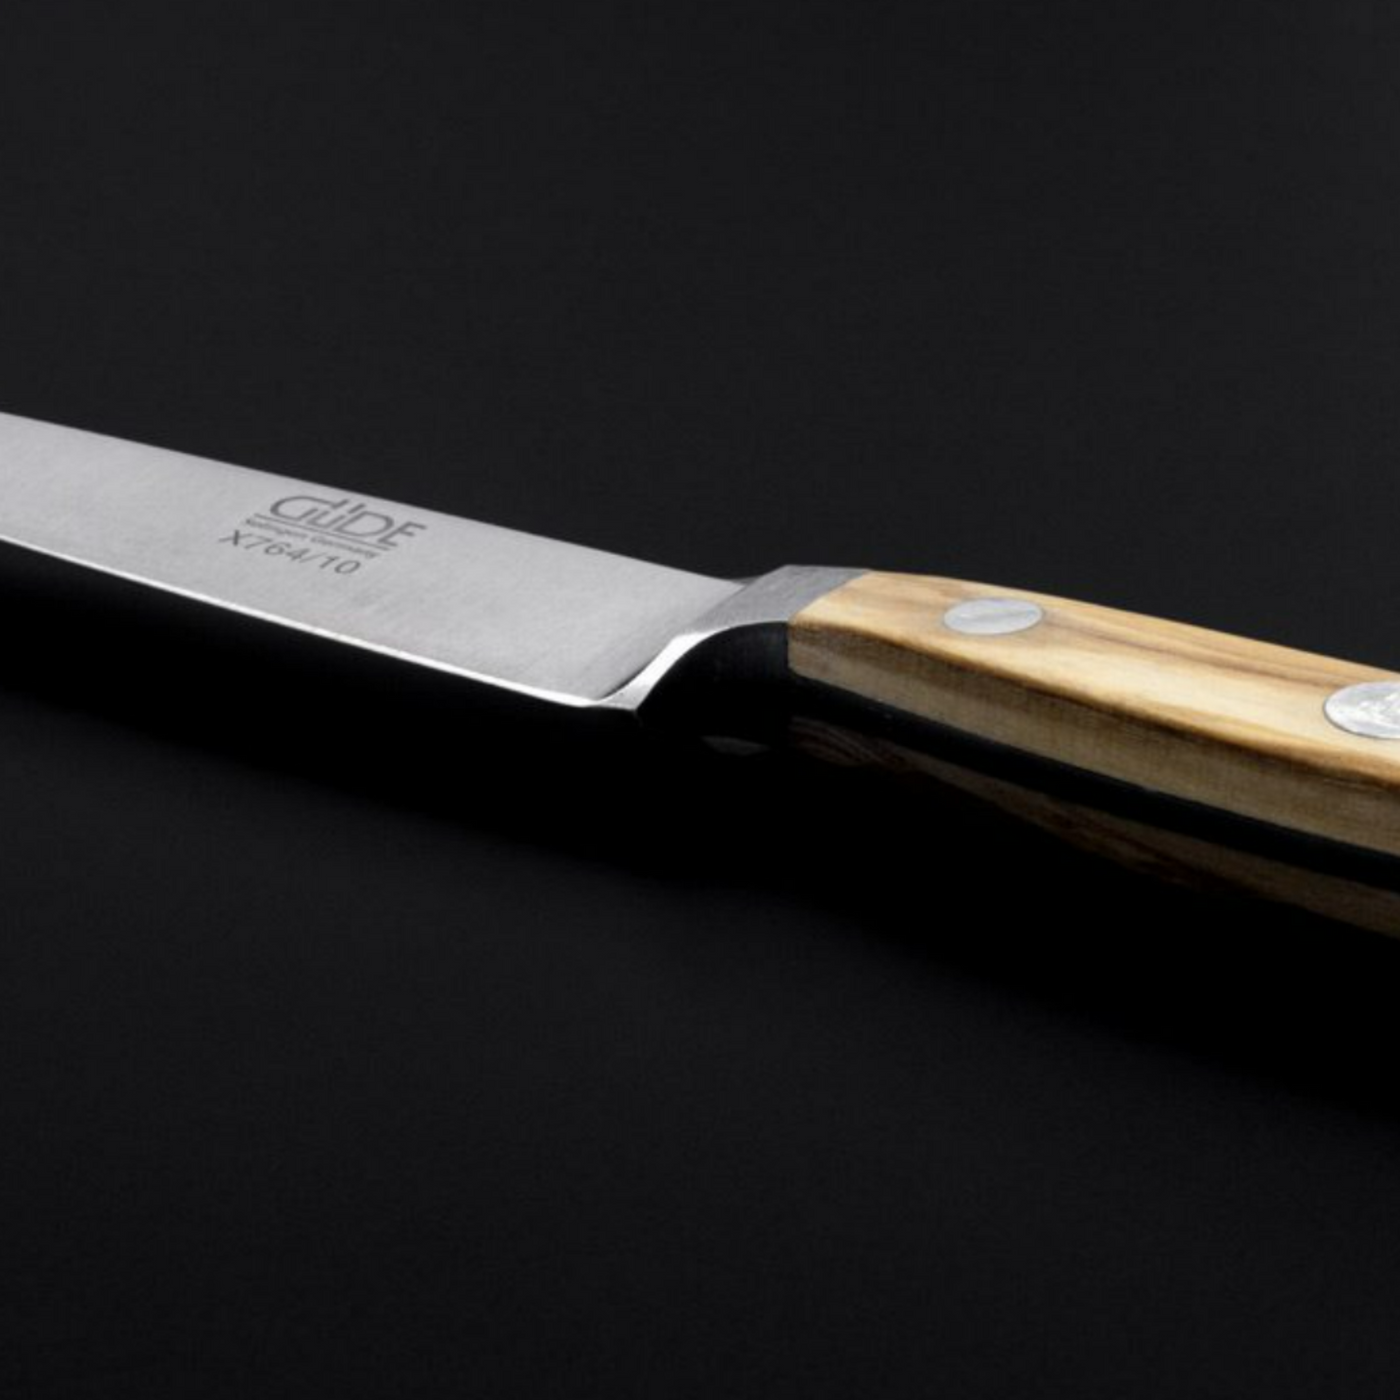 Gude Alpha Olive Chef's Knife With Olivewood Handle, 8-in - Kitchen Universe